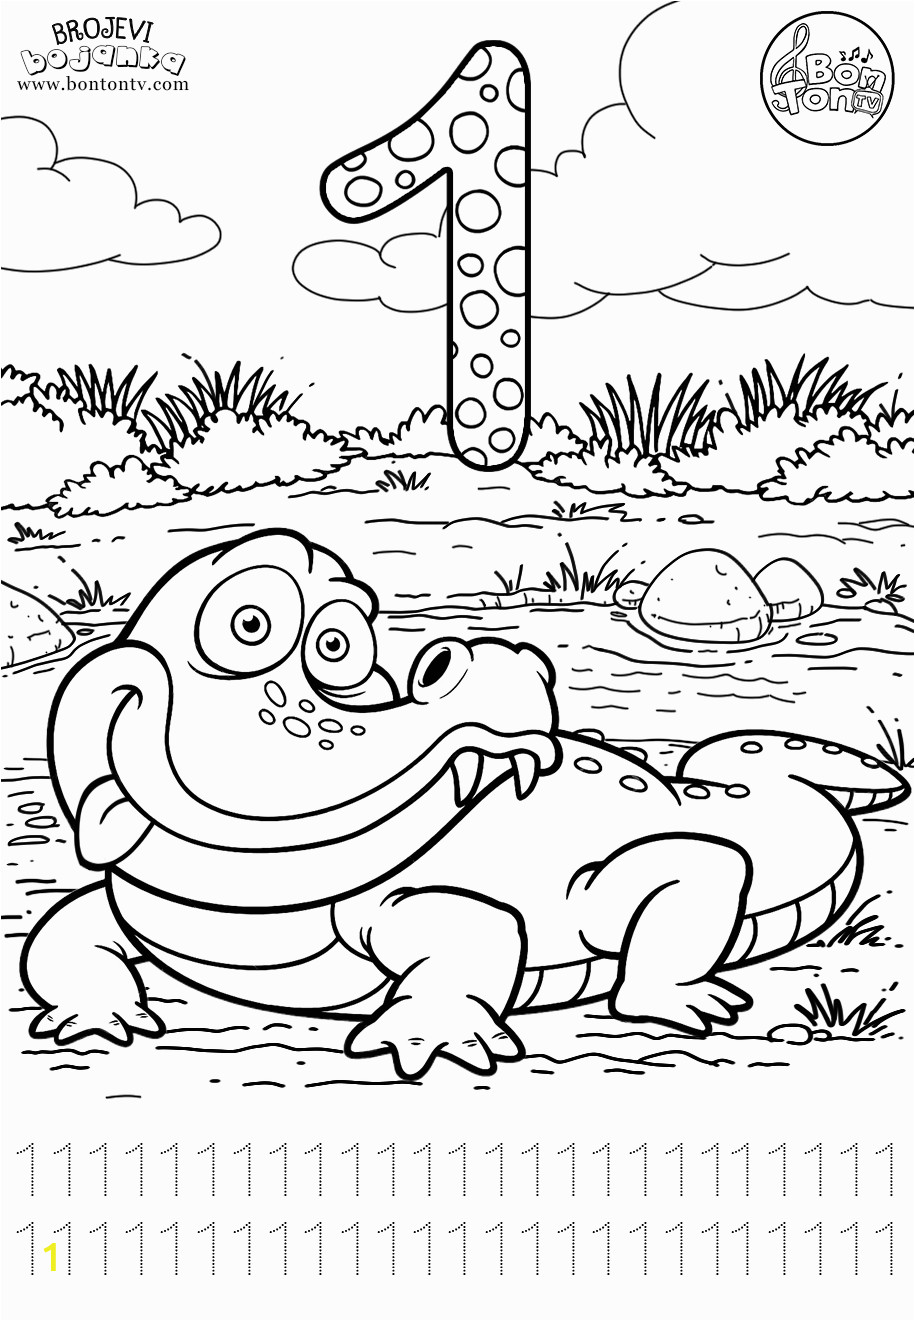 Coloring Pages Printable by Number Number 1 Preschool Printables Worksheets Coloring Pages